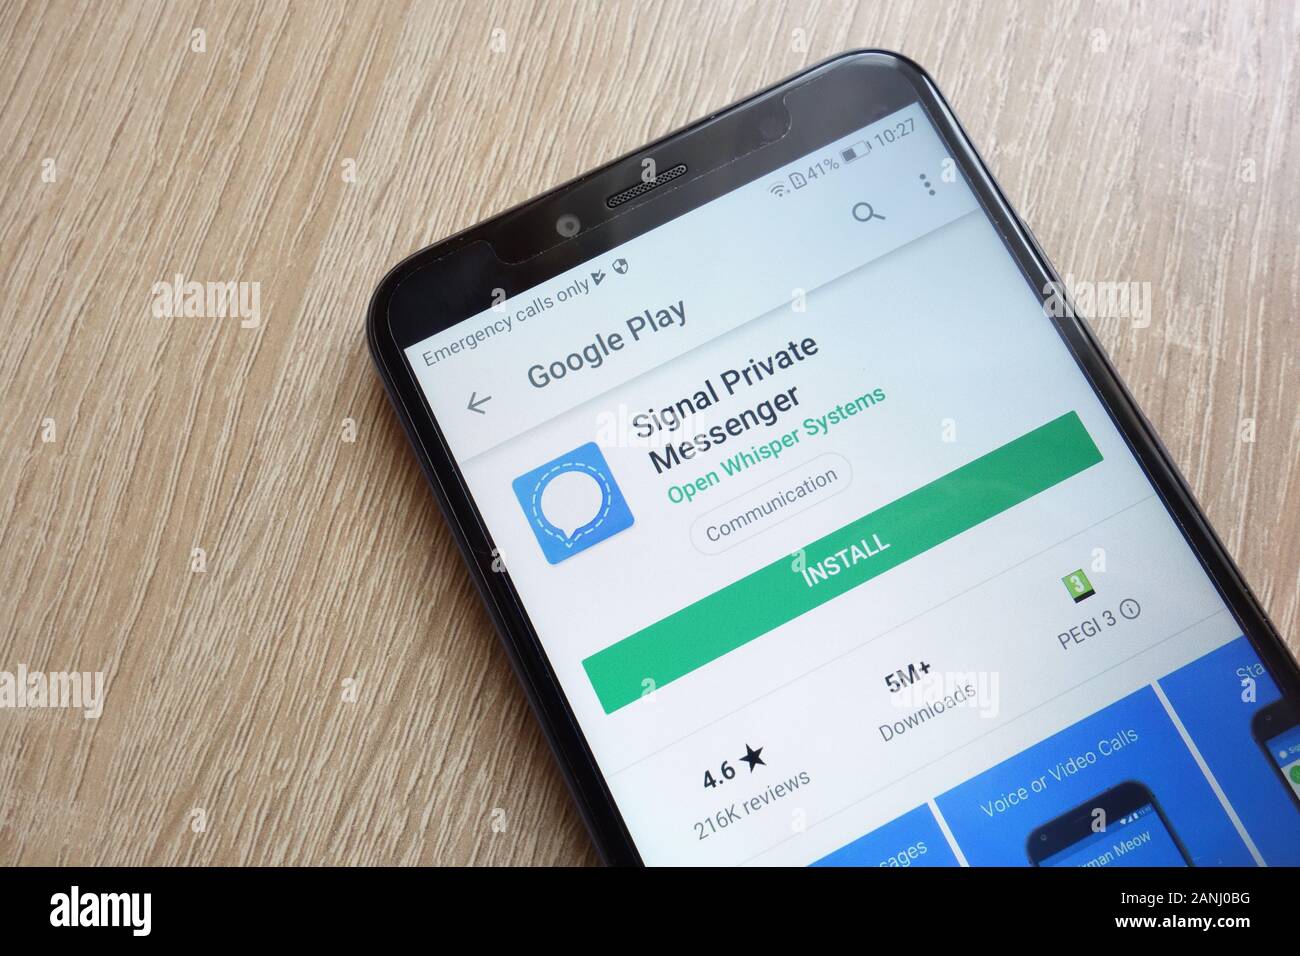 Signal Private Messenger App On Google Play Store Website